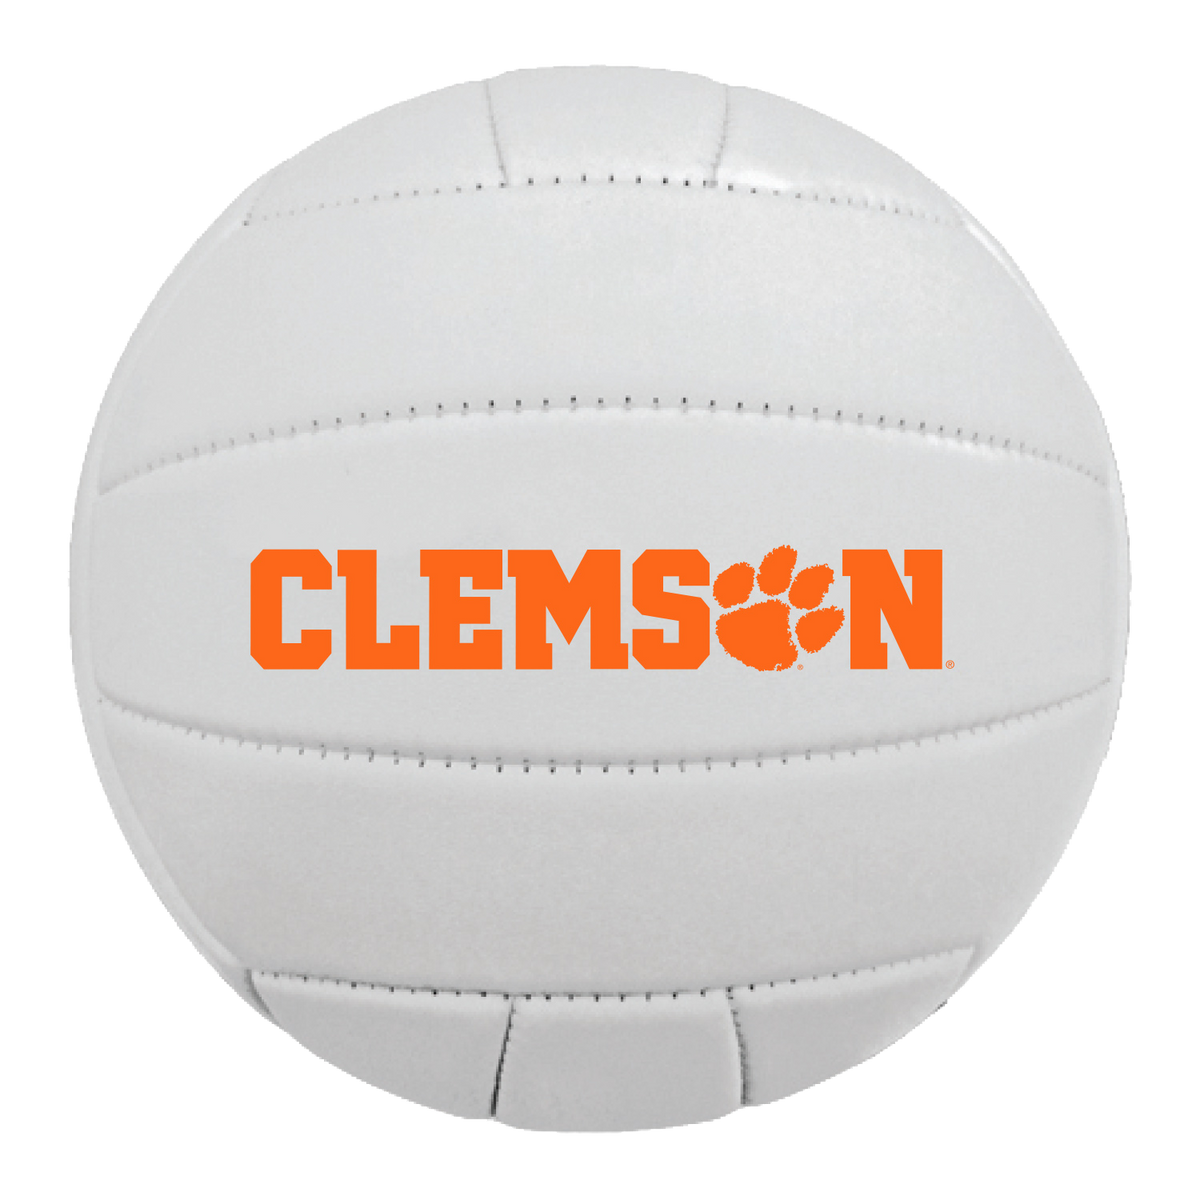 Clemson Full Size Synthetic Leather Volleyball with Paw